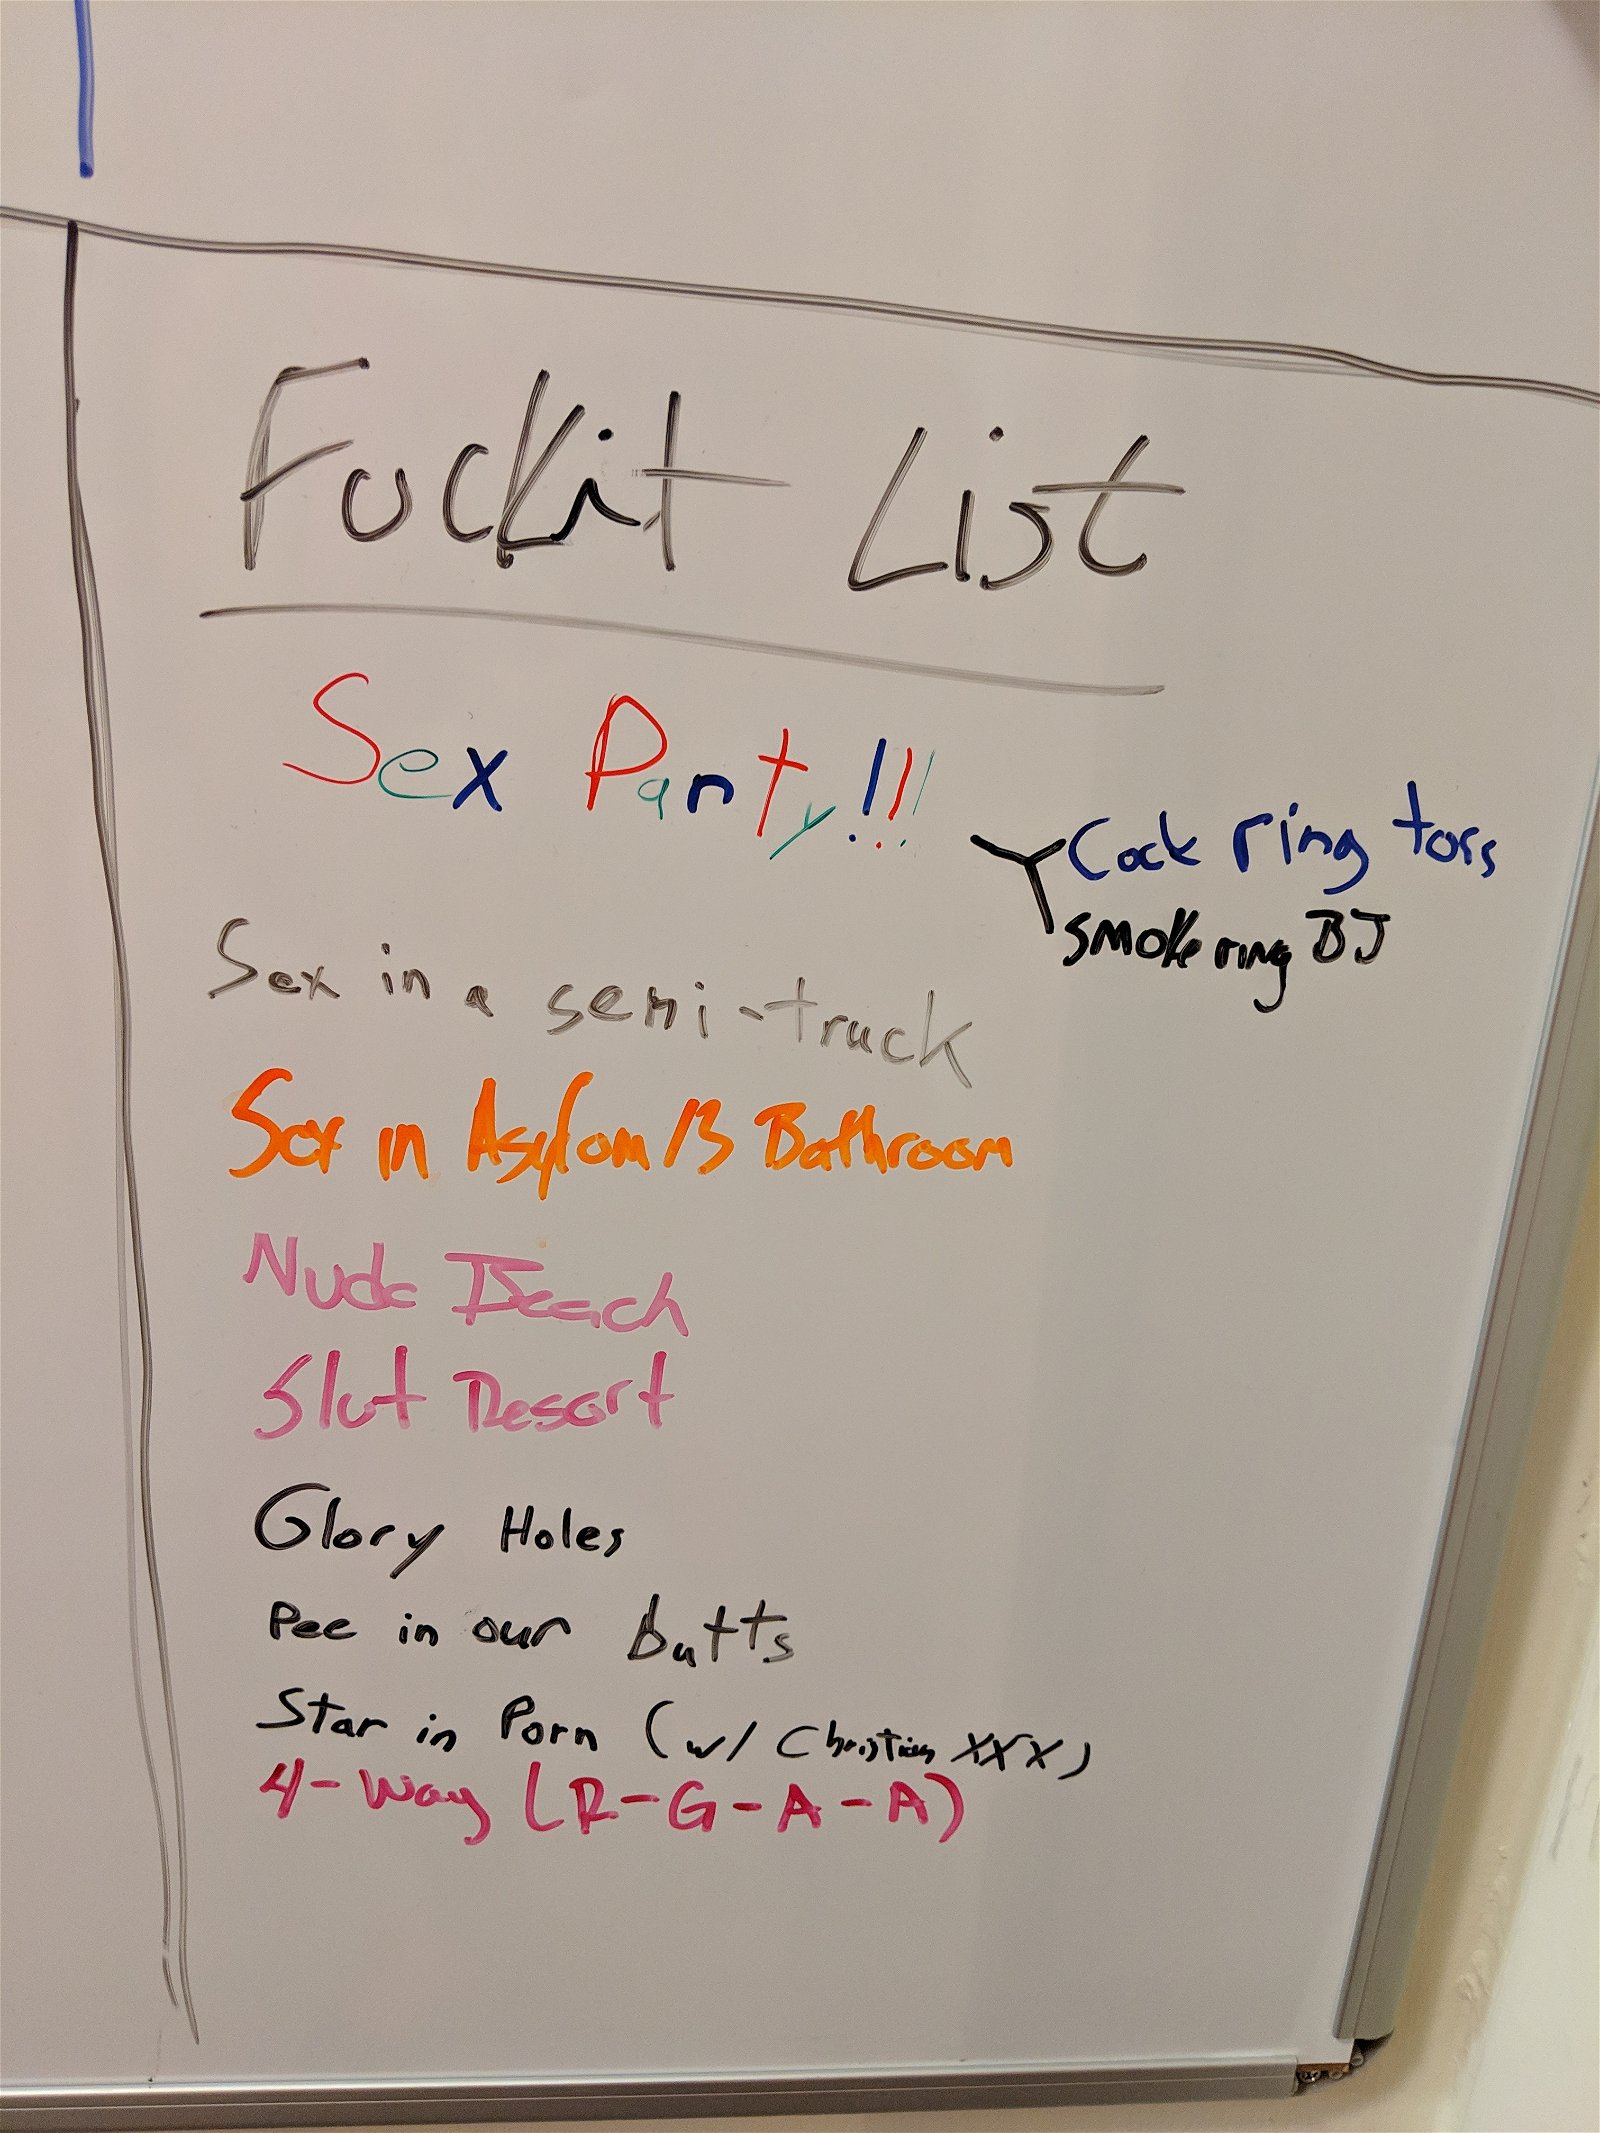 Photo by JessietheCDslut with the username @JessietheCDslut, who is a verified user,  December 31, 2018 at 2:48 PM. The post is about the topic Fuckit list and the text says 'This is the current list we have on the board in the hallway to the bedrooms'